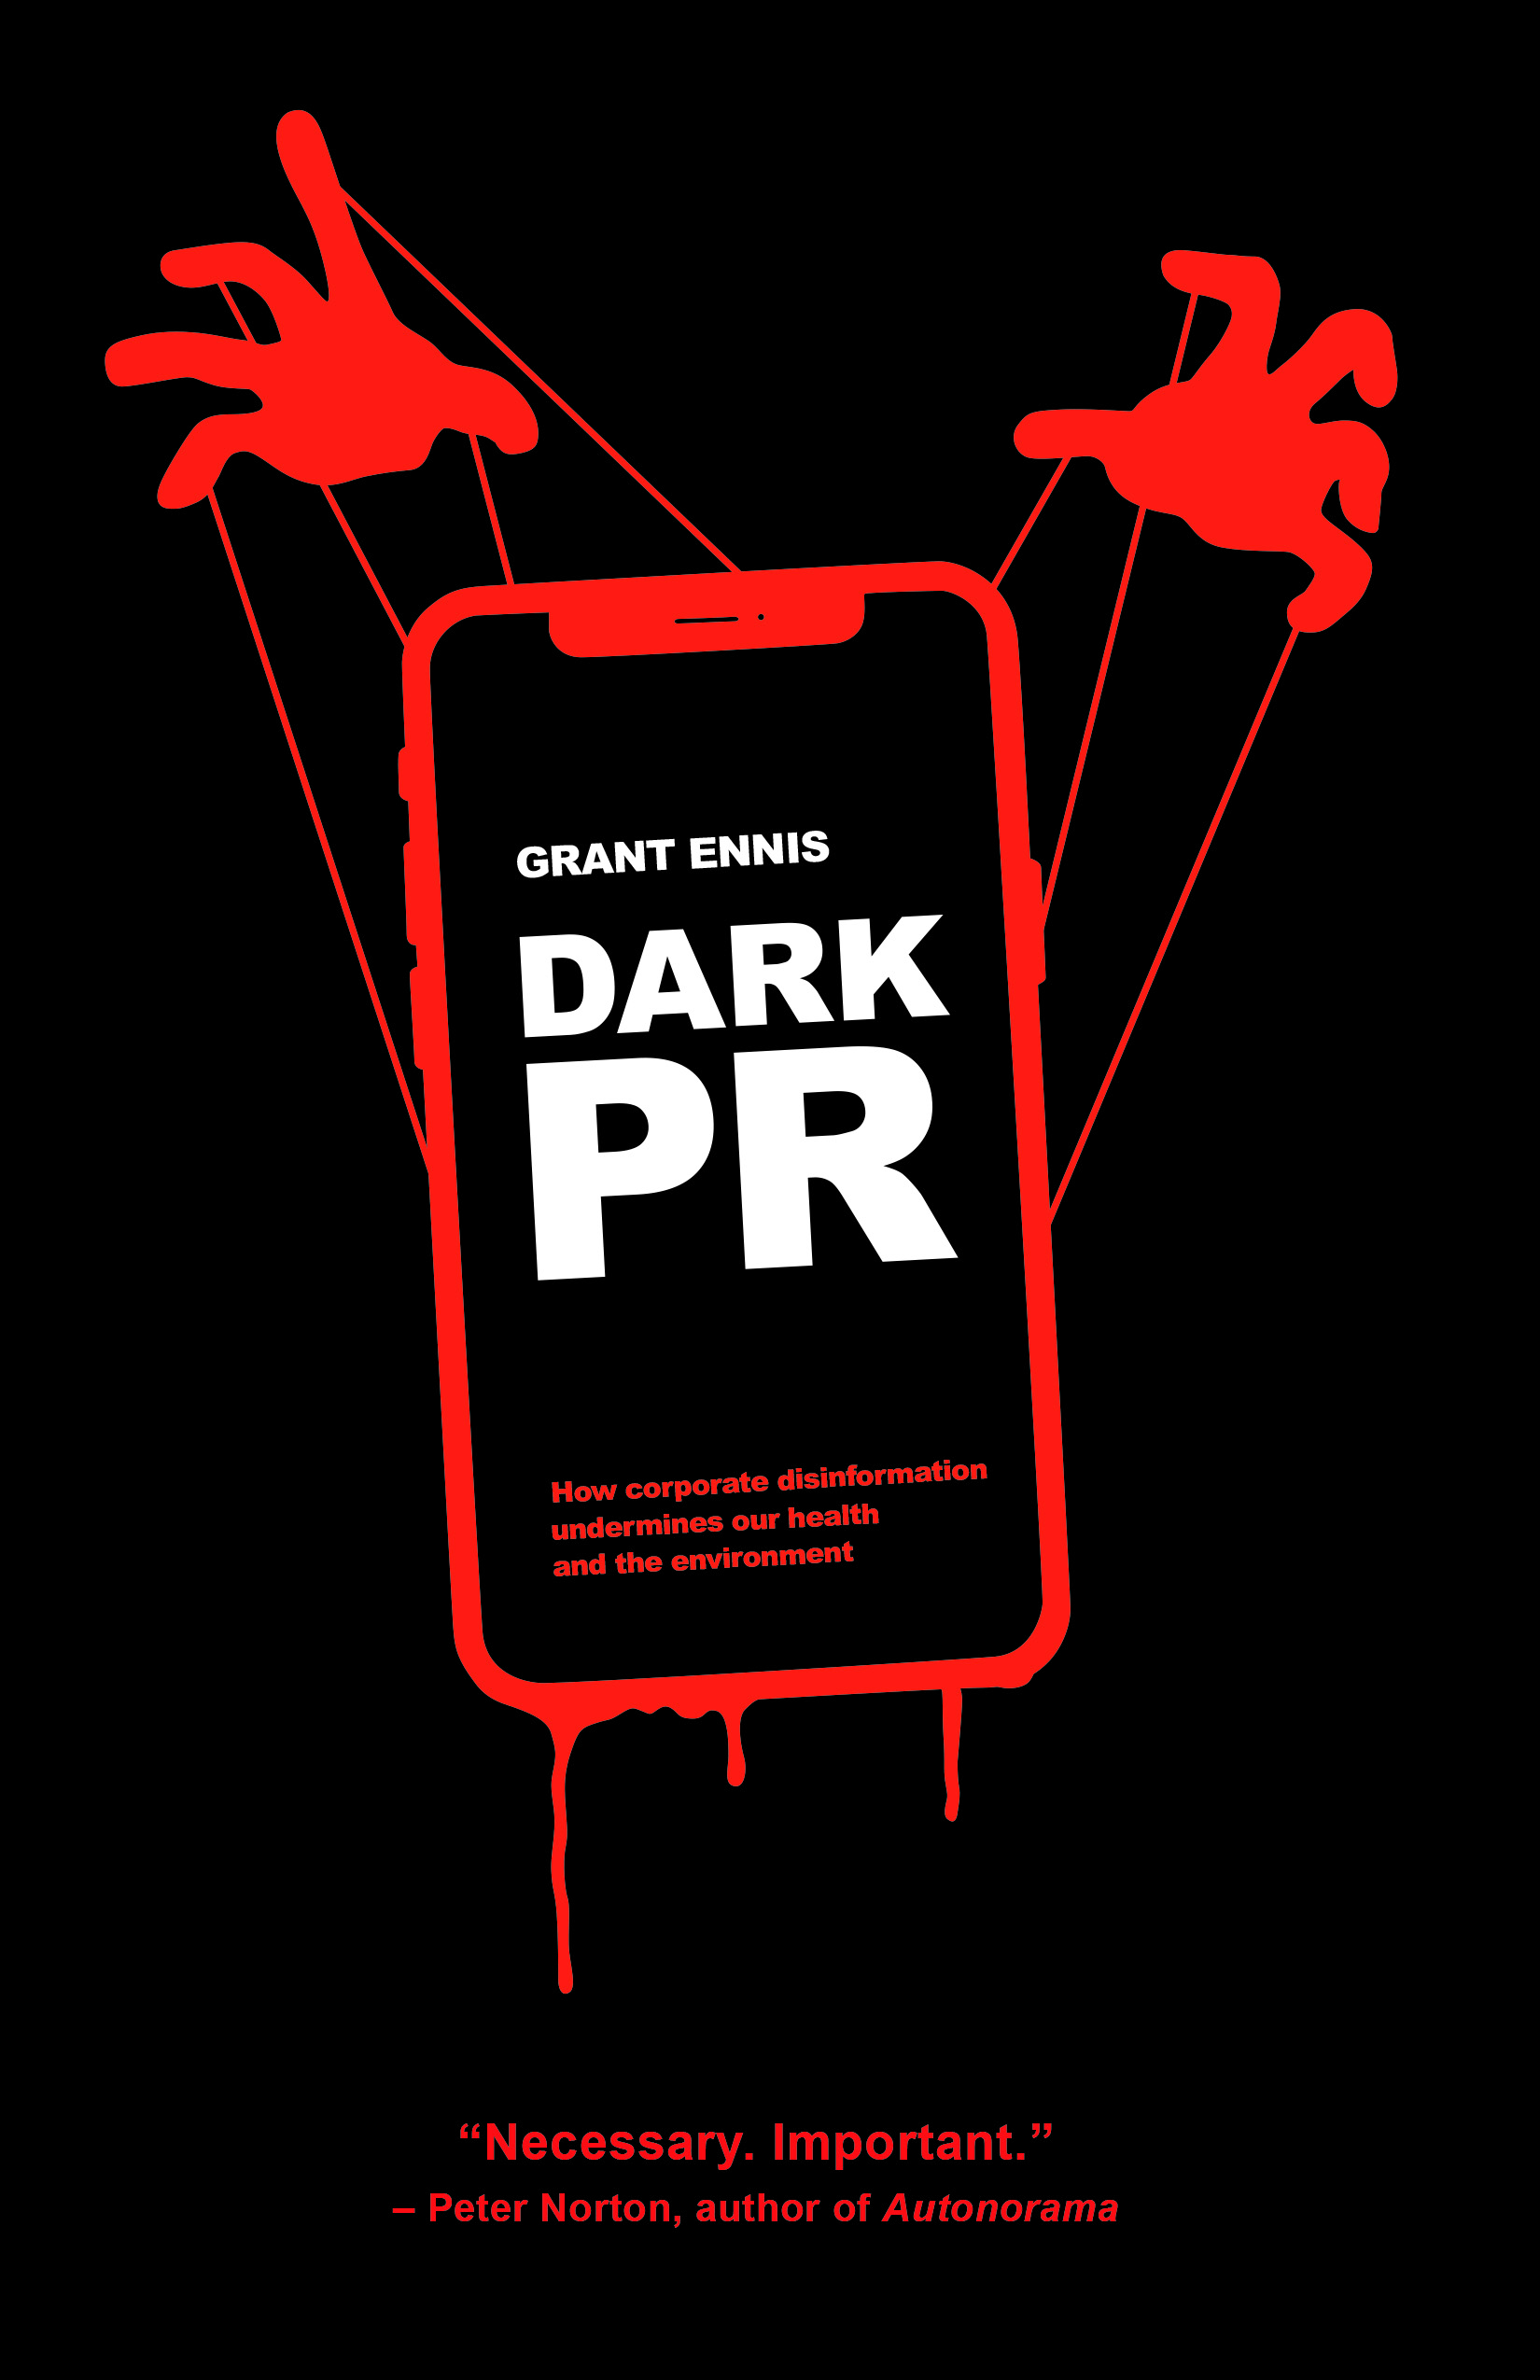 Dark PR: How corporate disinformation harms our health and the environment